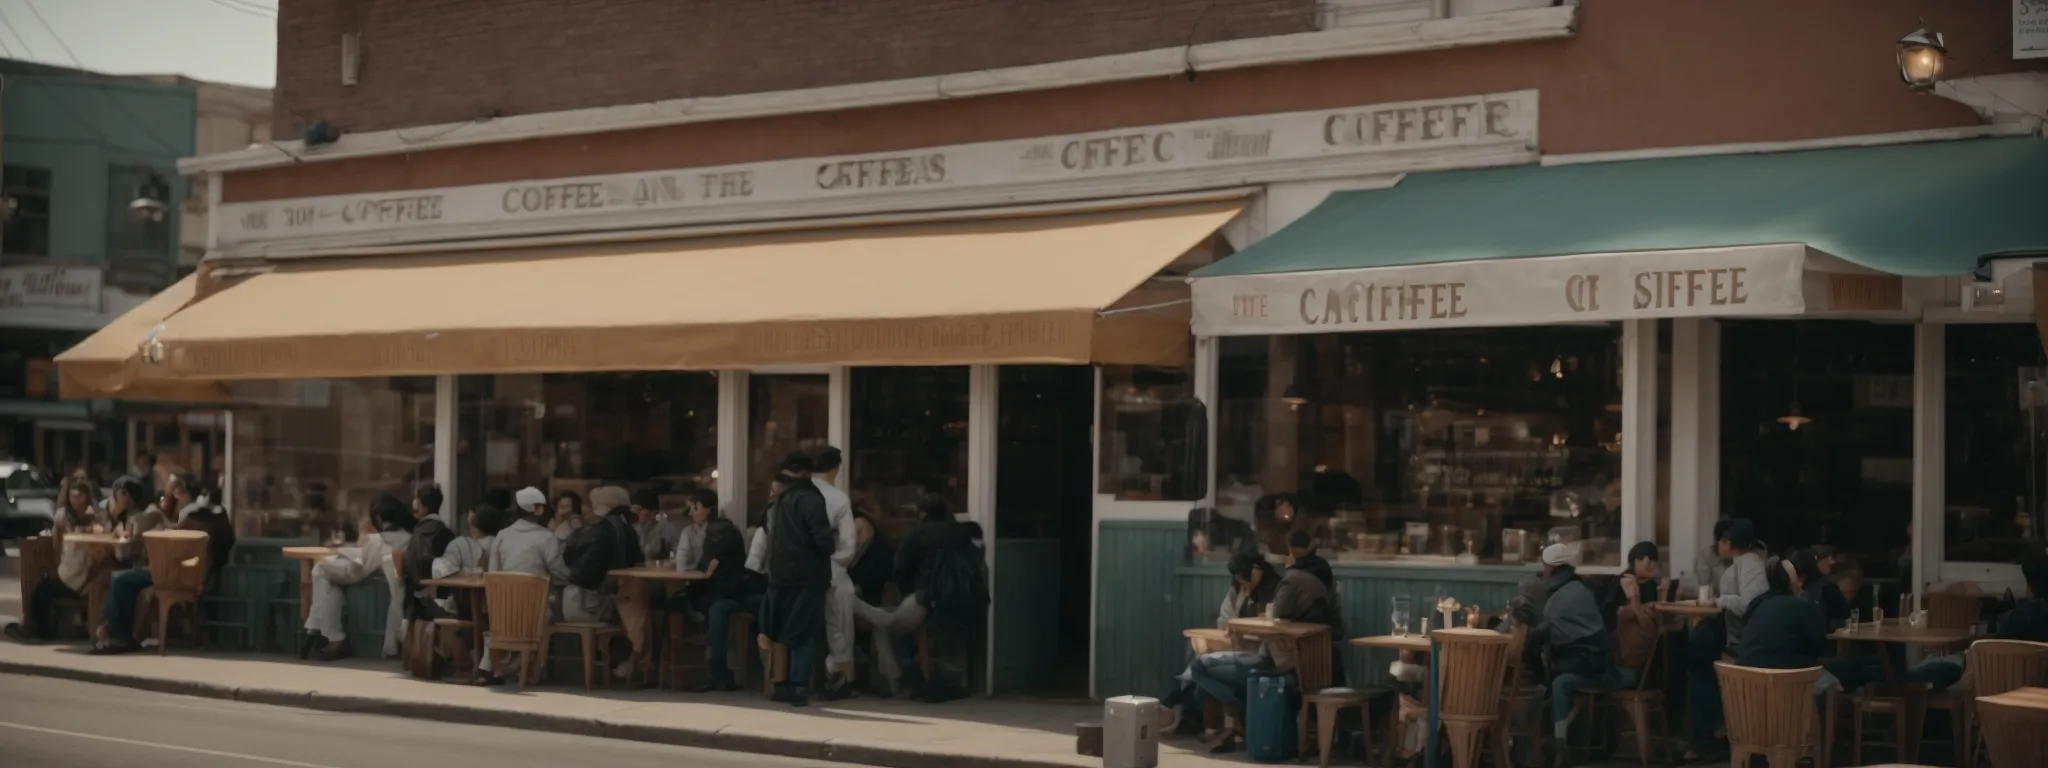 a bustling coffee shop with a prominent storefront sign visible from the street, bustling with local patrons.